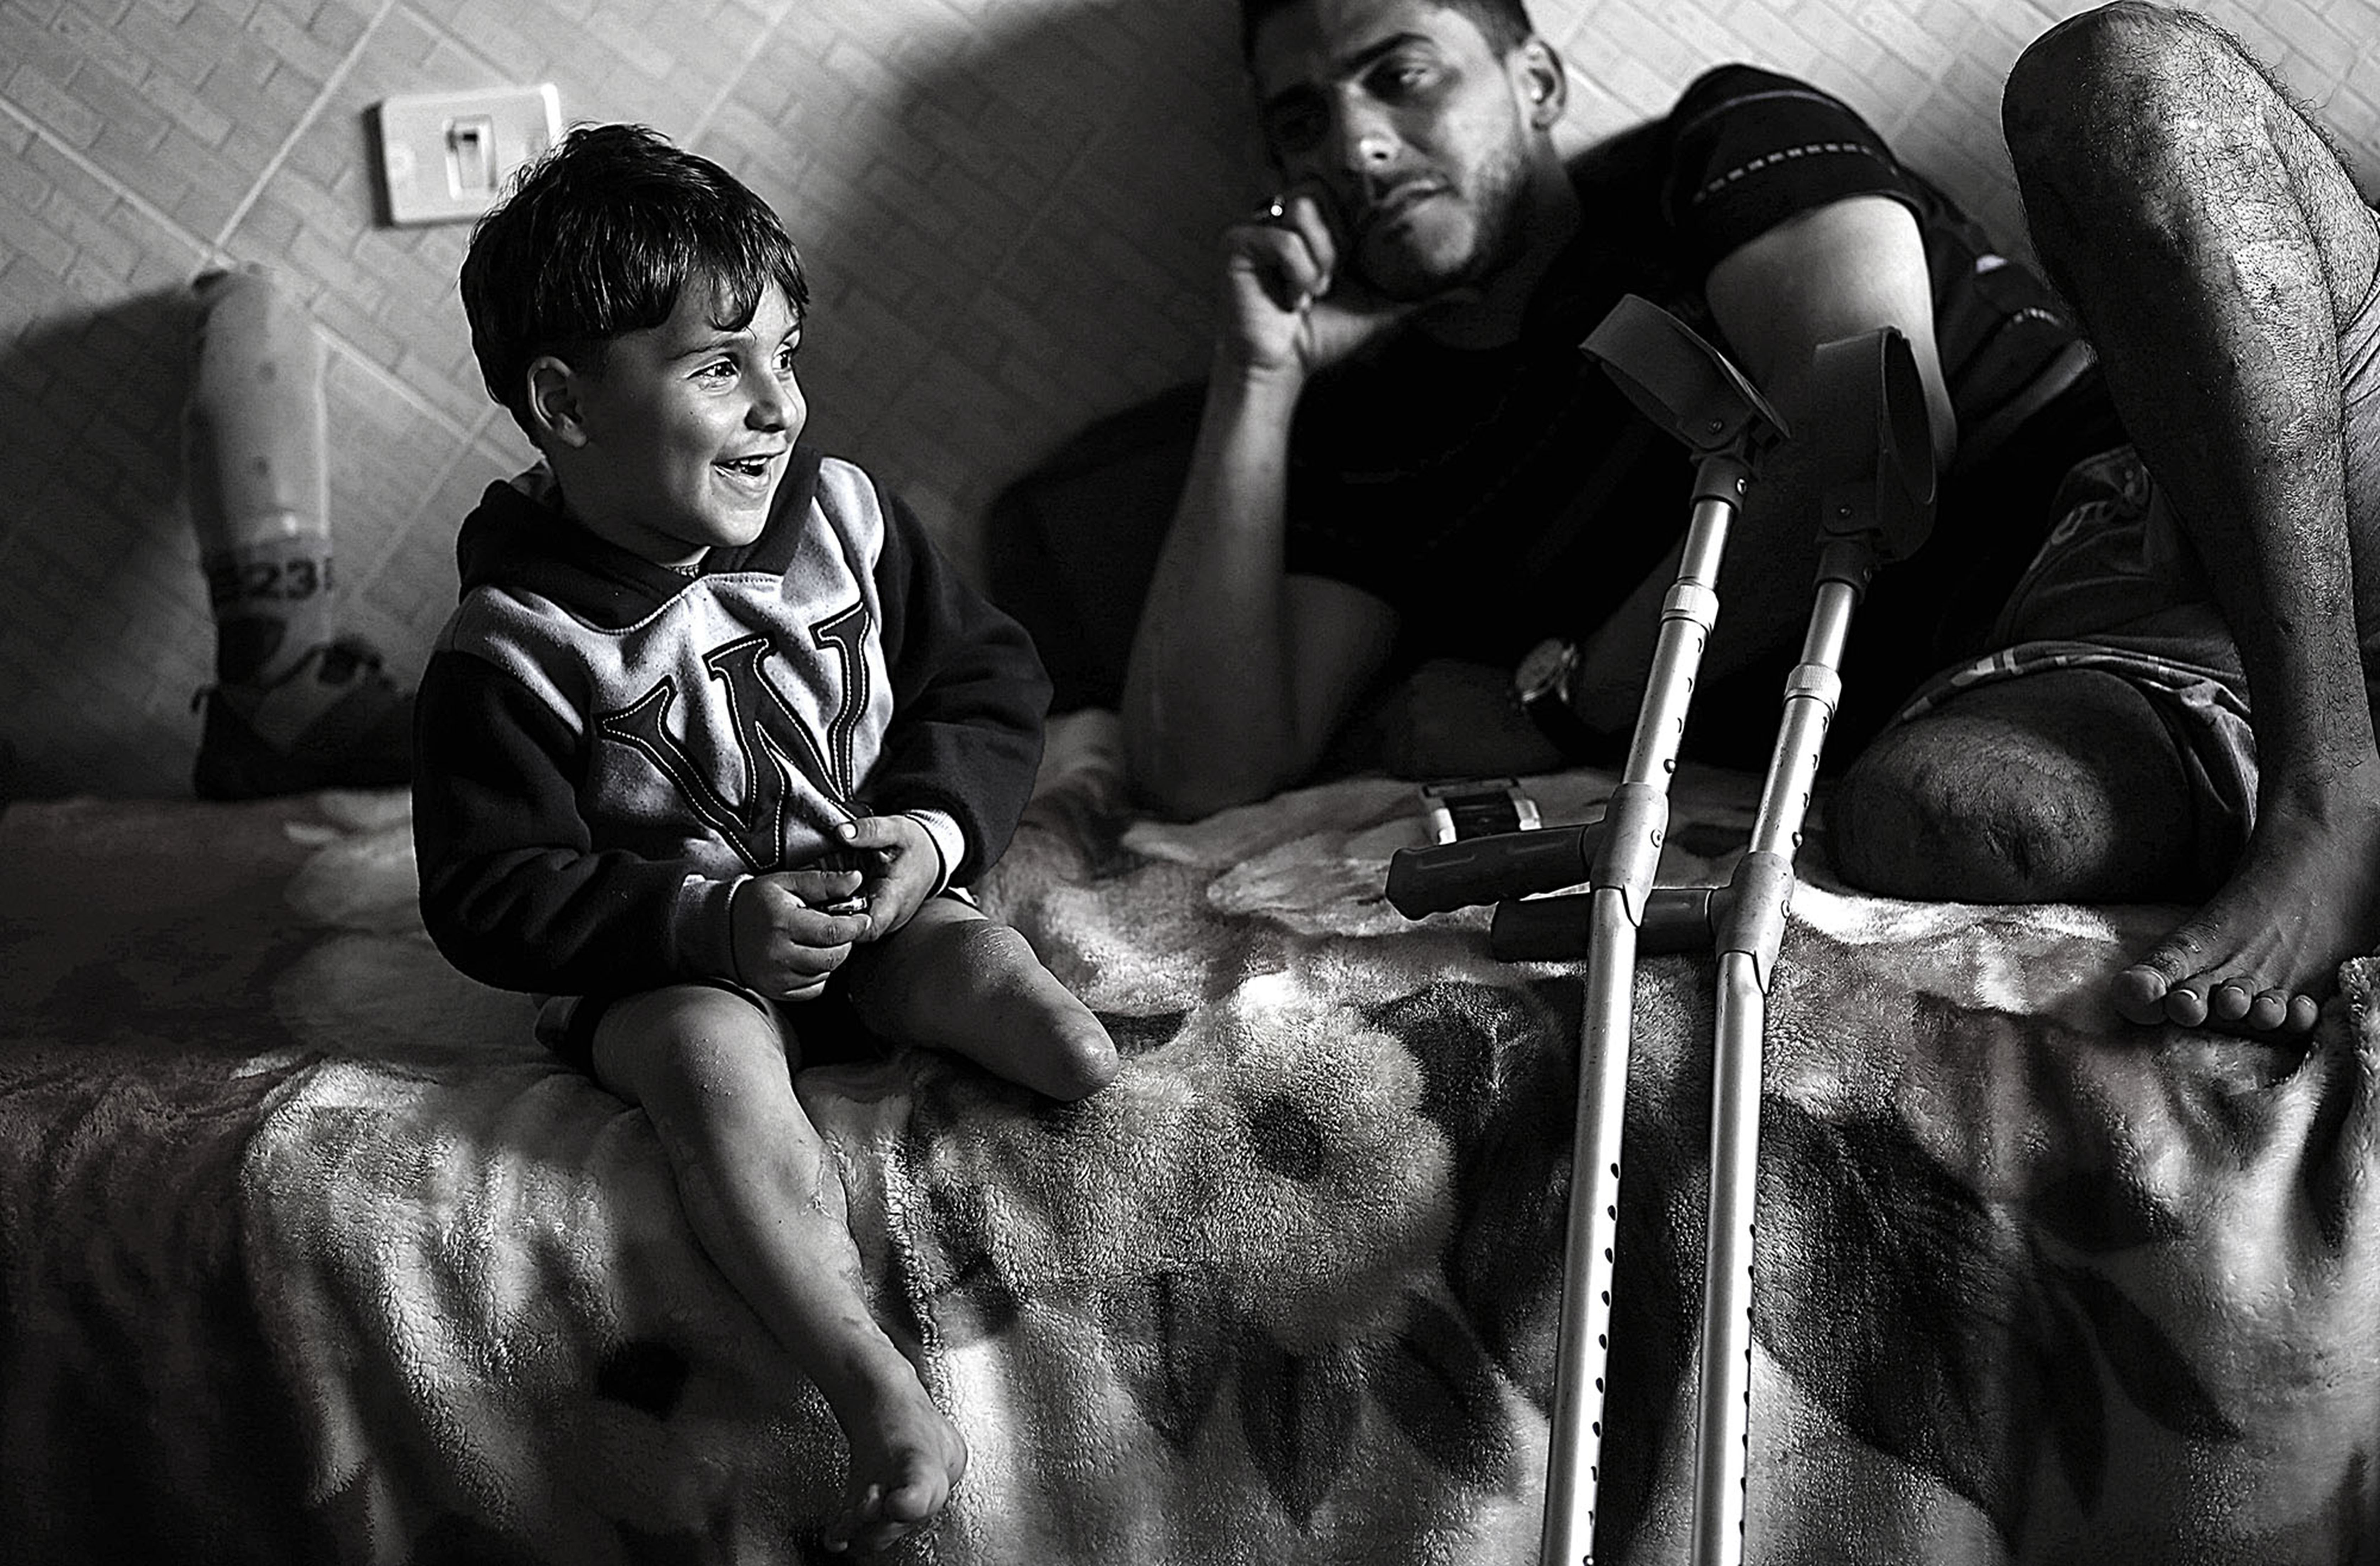 Wael Al-Namla, 27, sits with his son three years old Shareif In their house in Al- Joneina neighbourhood in the east of Rafah town in the southern Gaza Strip on 17 March 2015. Wael Al Namla, 27, his wife Israa, 21, and their son Shareif three years old, three of them lost the lower lips together to one Israeli bomb when they were trying to find a safe place to stay at, following a 72-hour ceasefire declaration during the 51 day of war in, 01 Augast 2014.